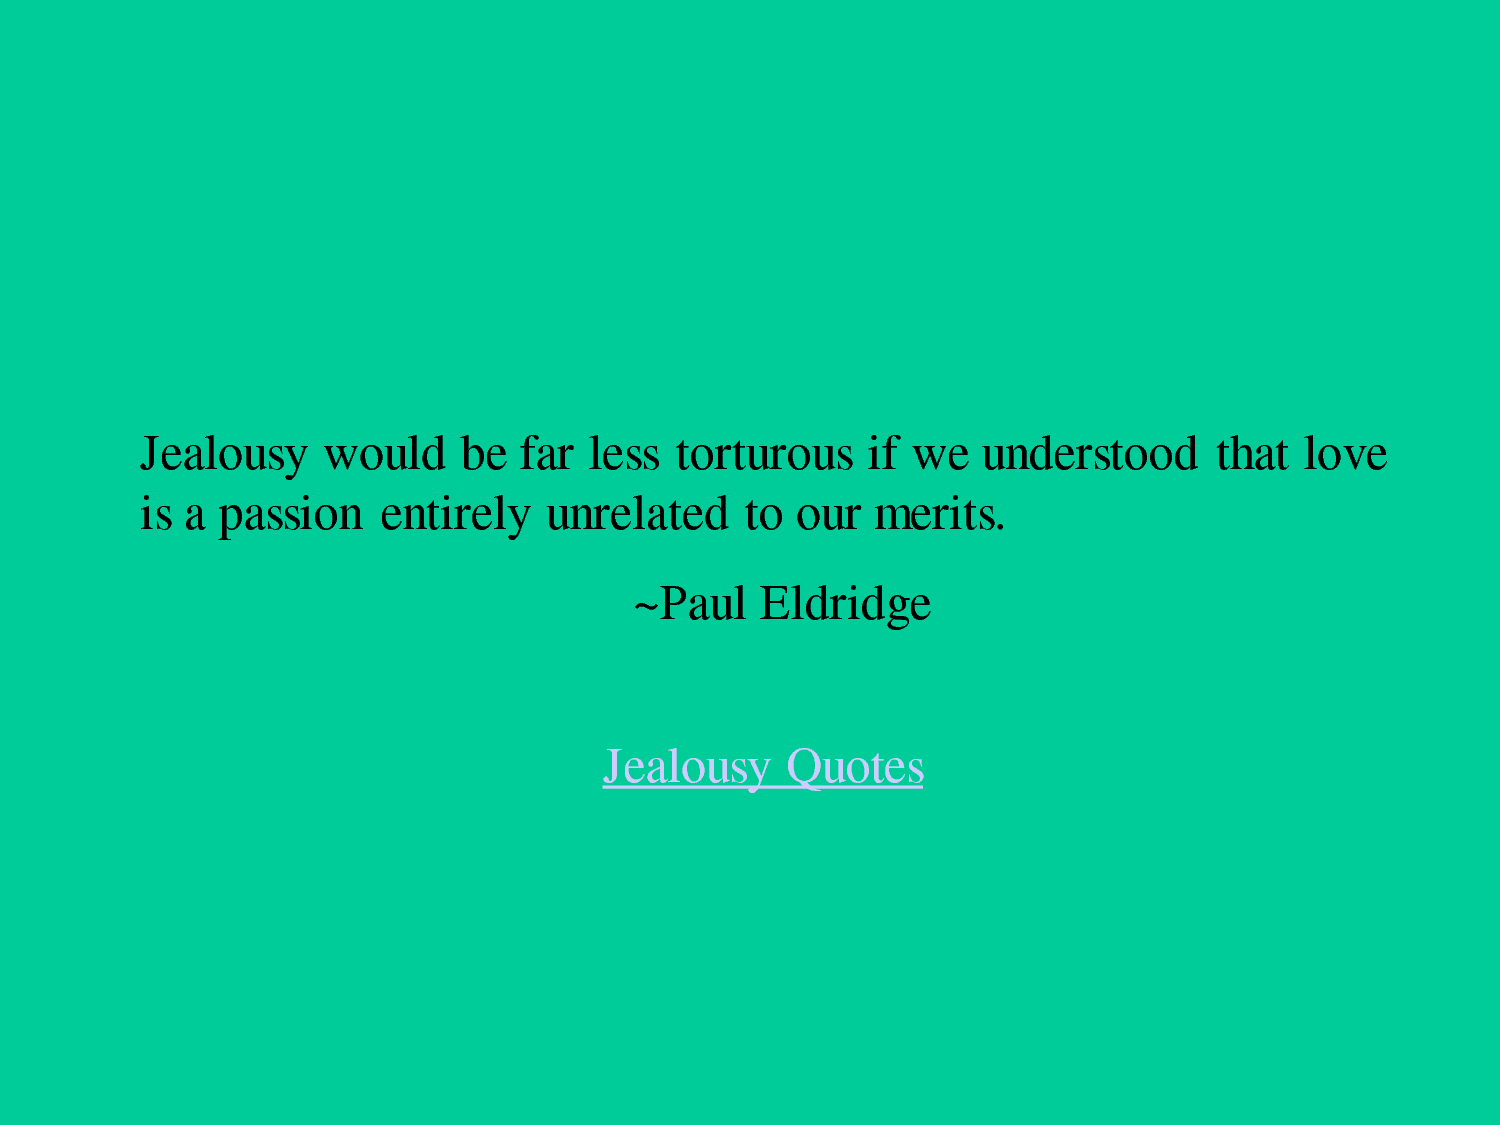 Jealousy would be far less torturous if we understood that love is a passion entirely unrelated to our merits.